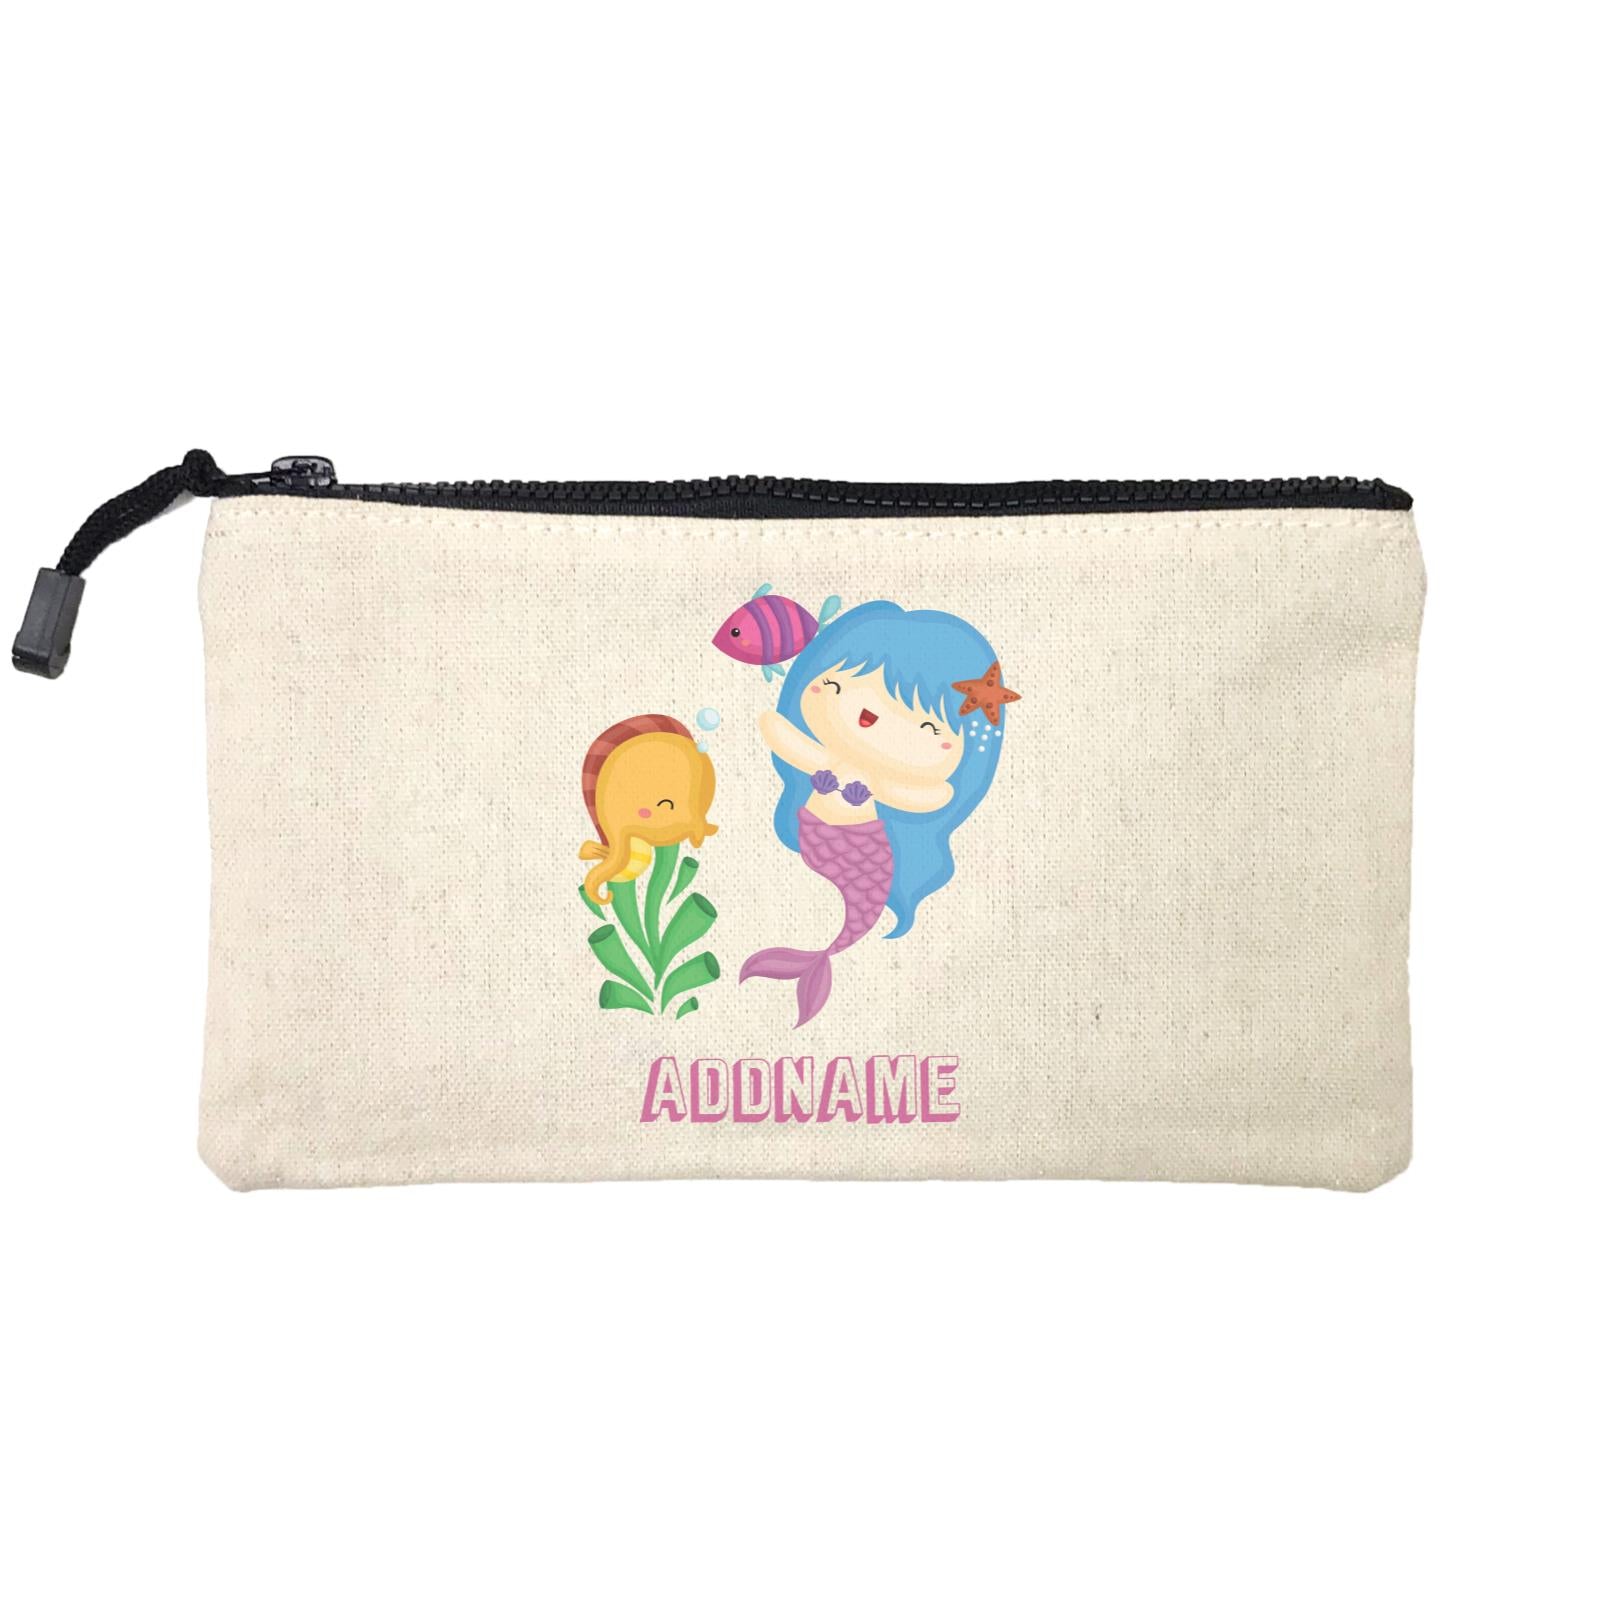 Birthday Mermaid Blue Hair Mermaid Playing With Seahorse Addname Mini Accessories Stationery Pouch